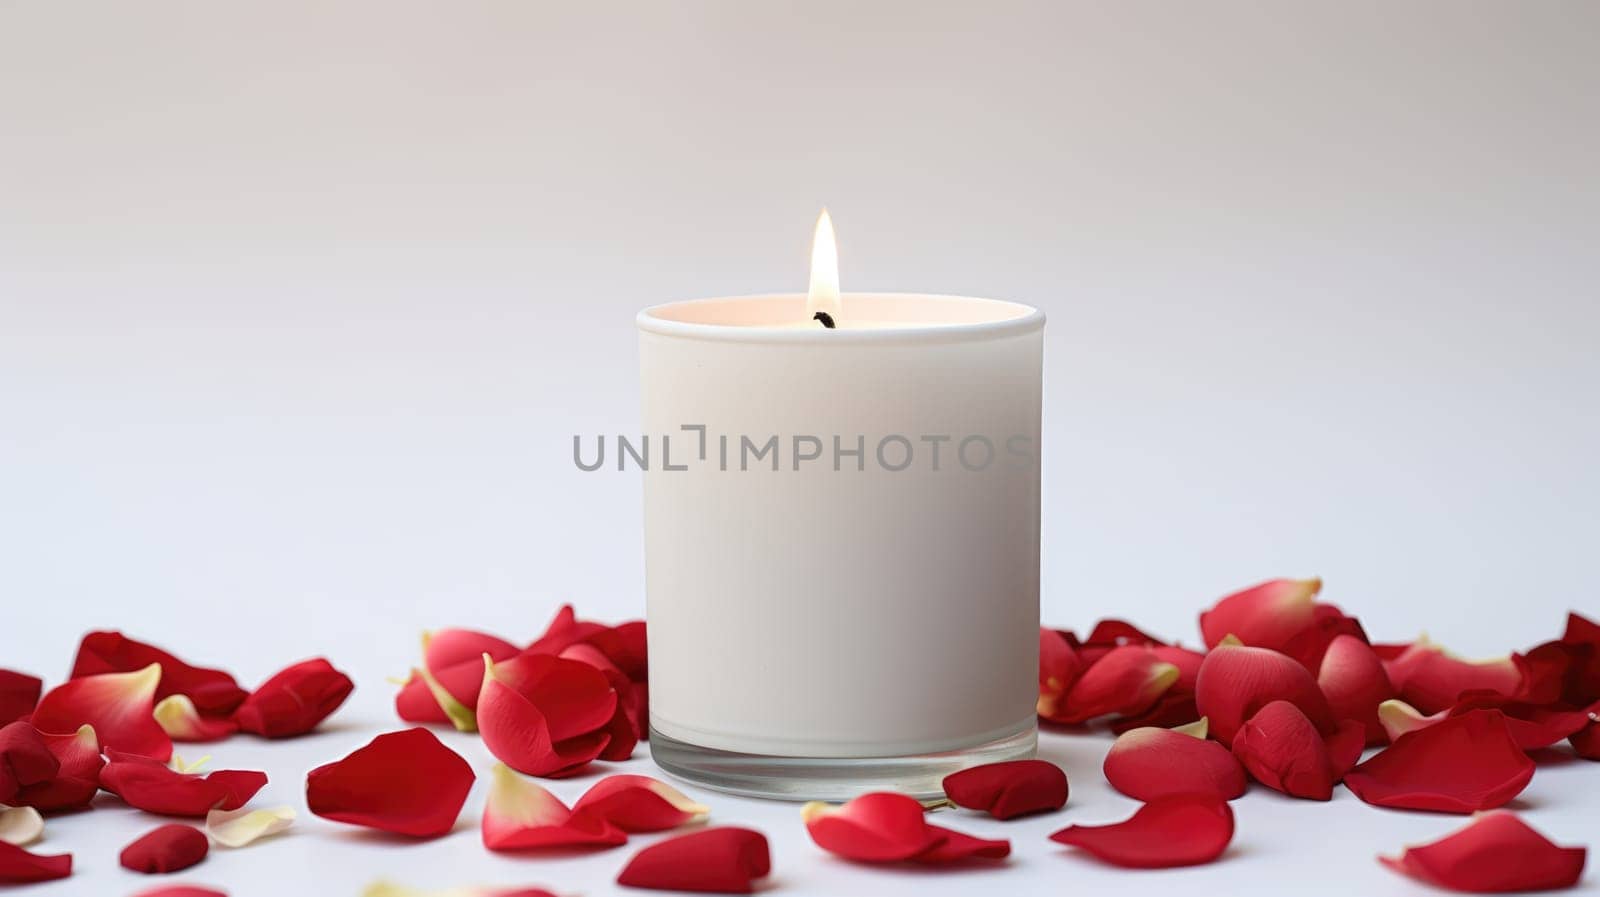 Soy wax aroma candles in jar on table with red flower petals. Candle mockup design. Mockup soy wax candle in natural style